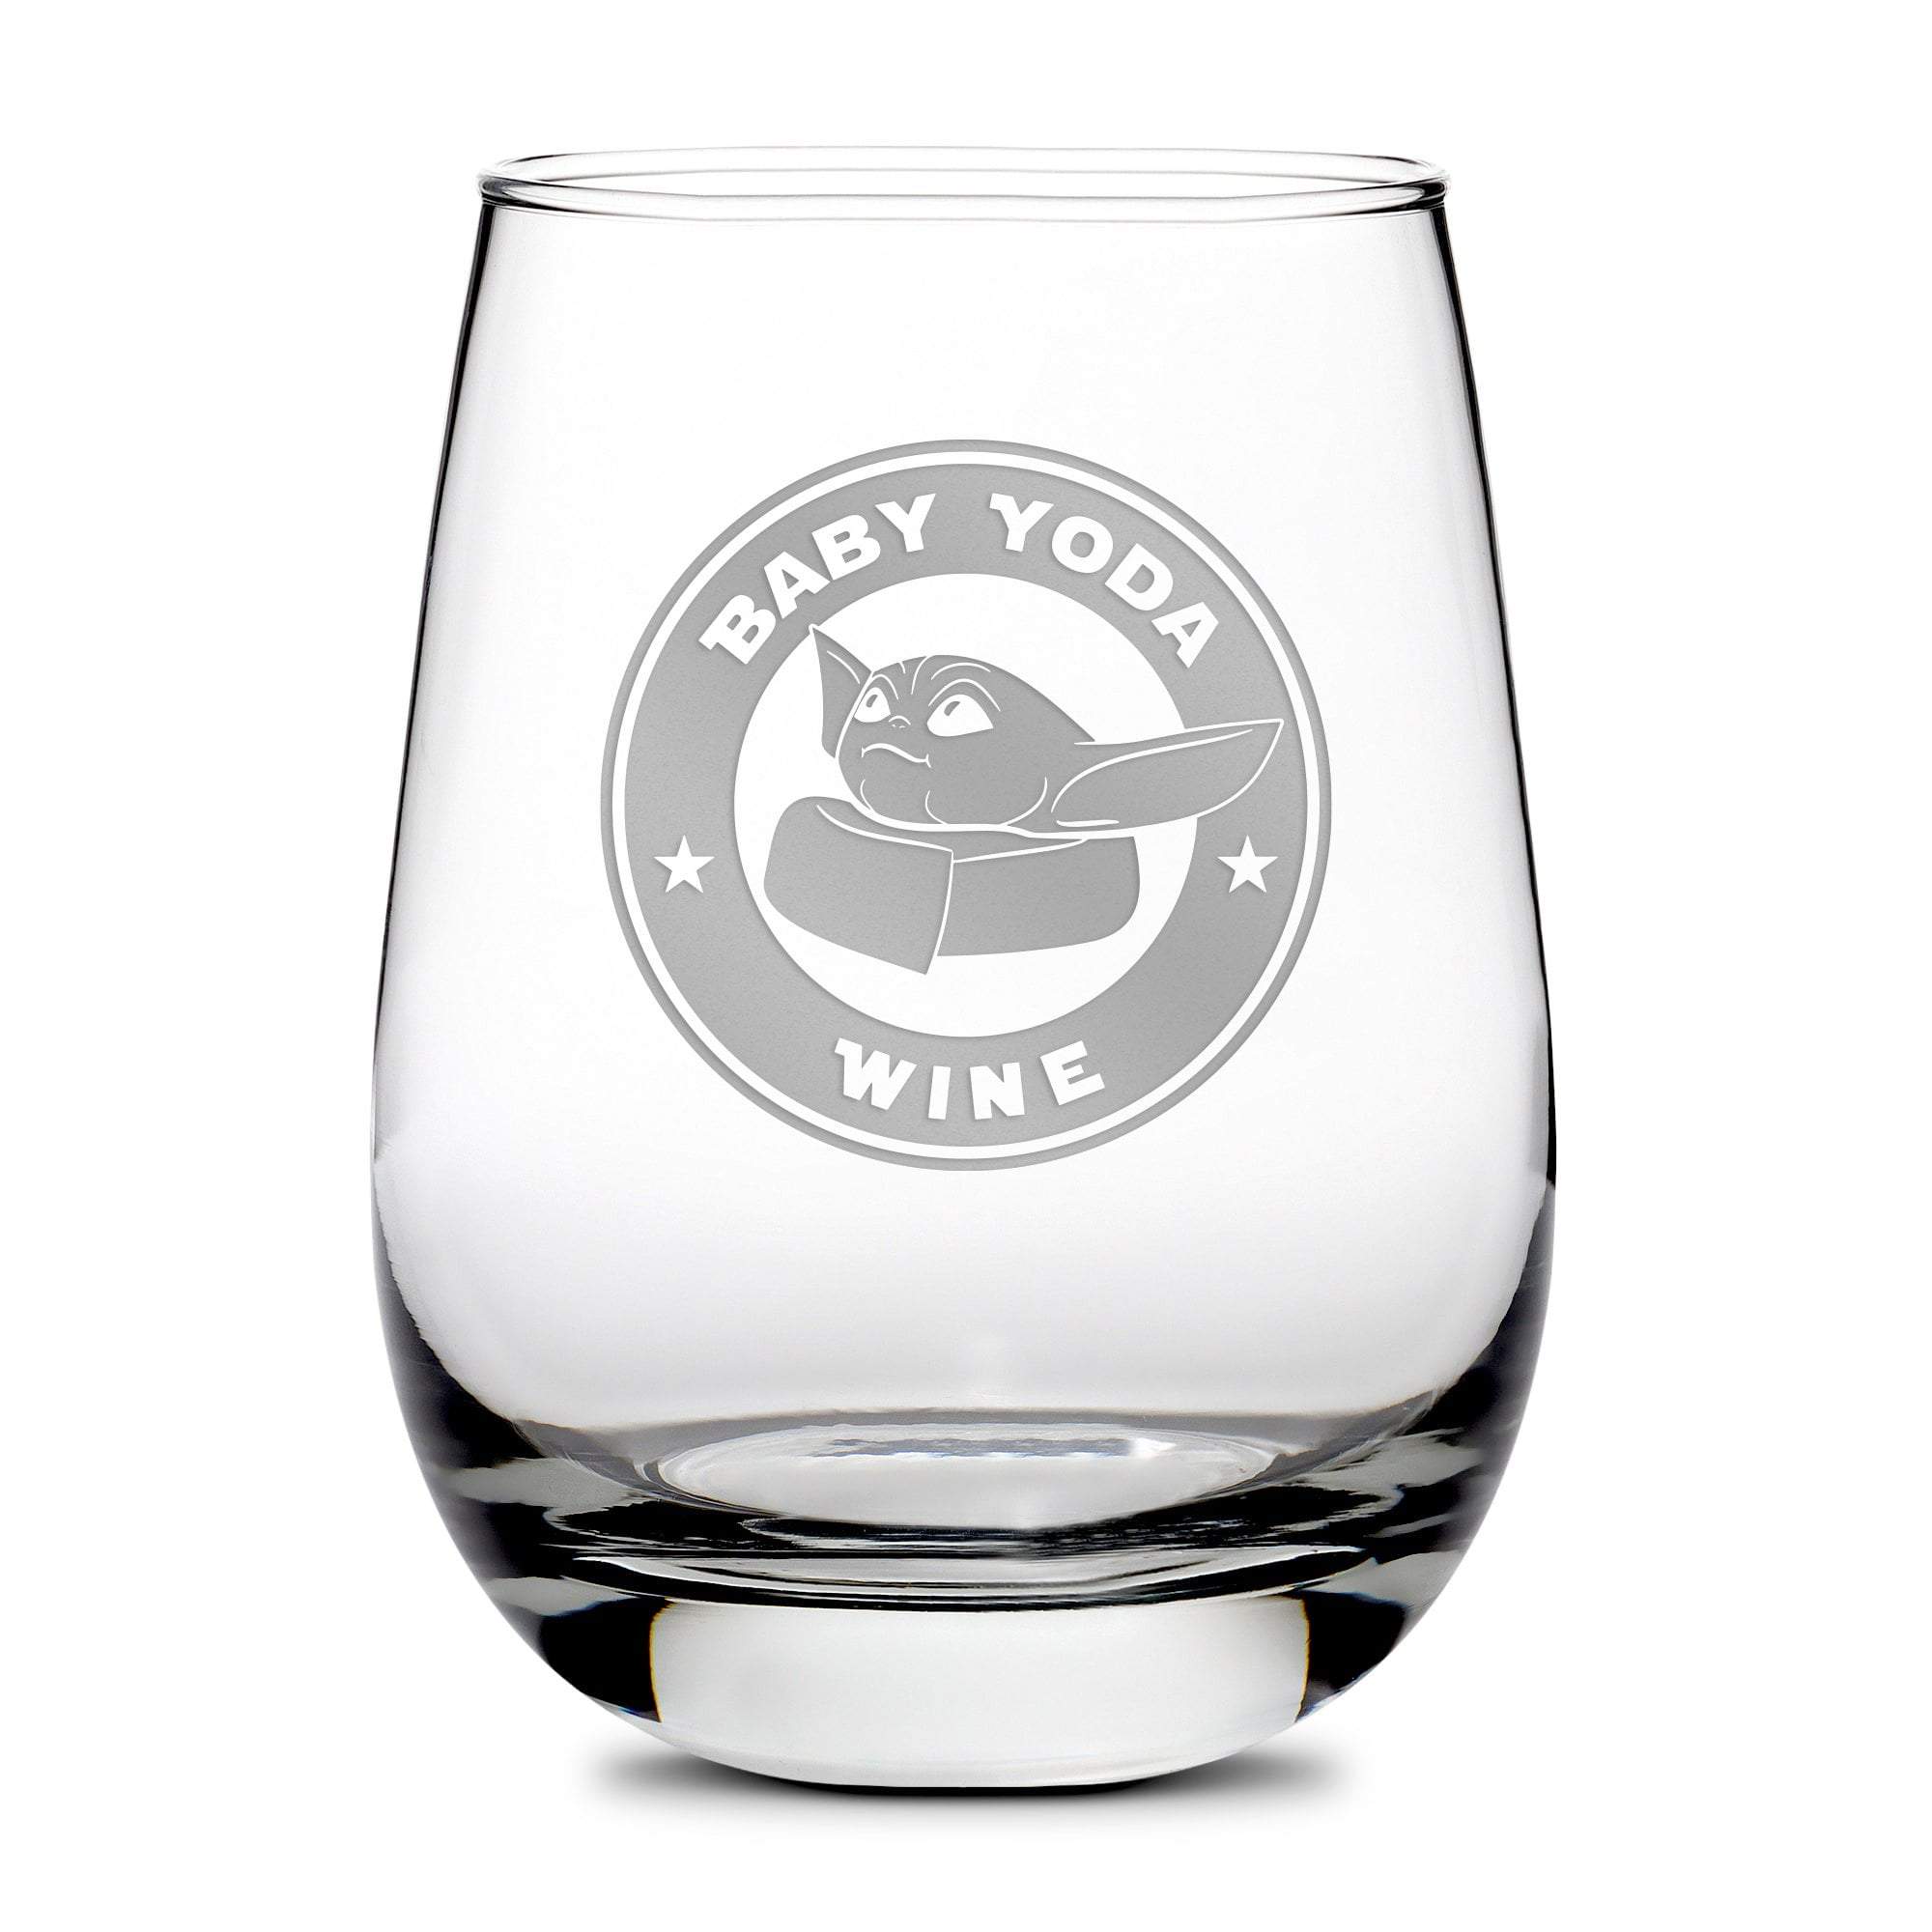 Premium Stemless Wine Glass, Baby Yoda Wine, 16oz, Laser Etched or Hand Etched